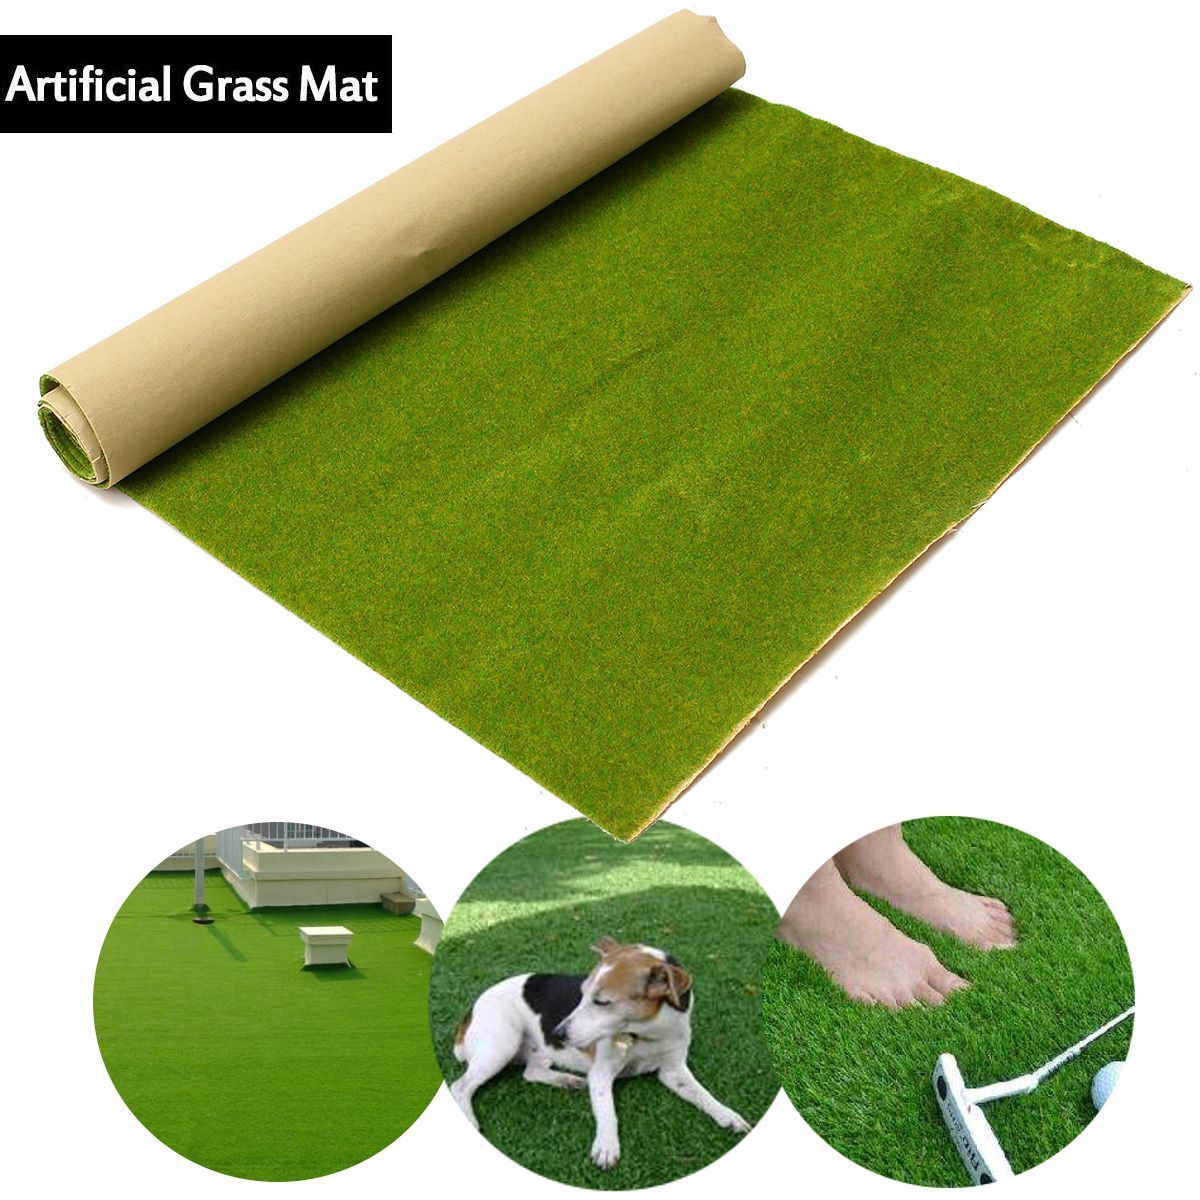 Synthetic-Turf-Grass-Simulation-Lawn-Garden-Artificial-Ornament-Doll-House-DIY-Decorations-1528427